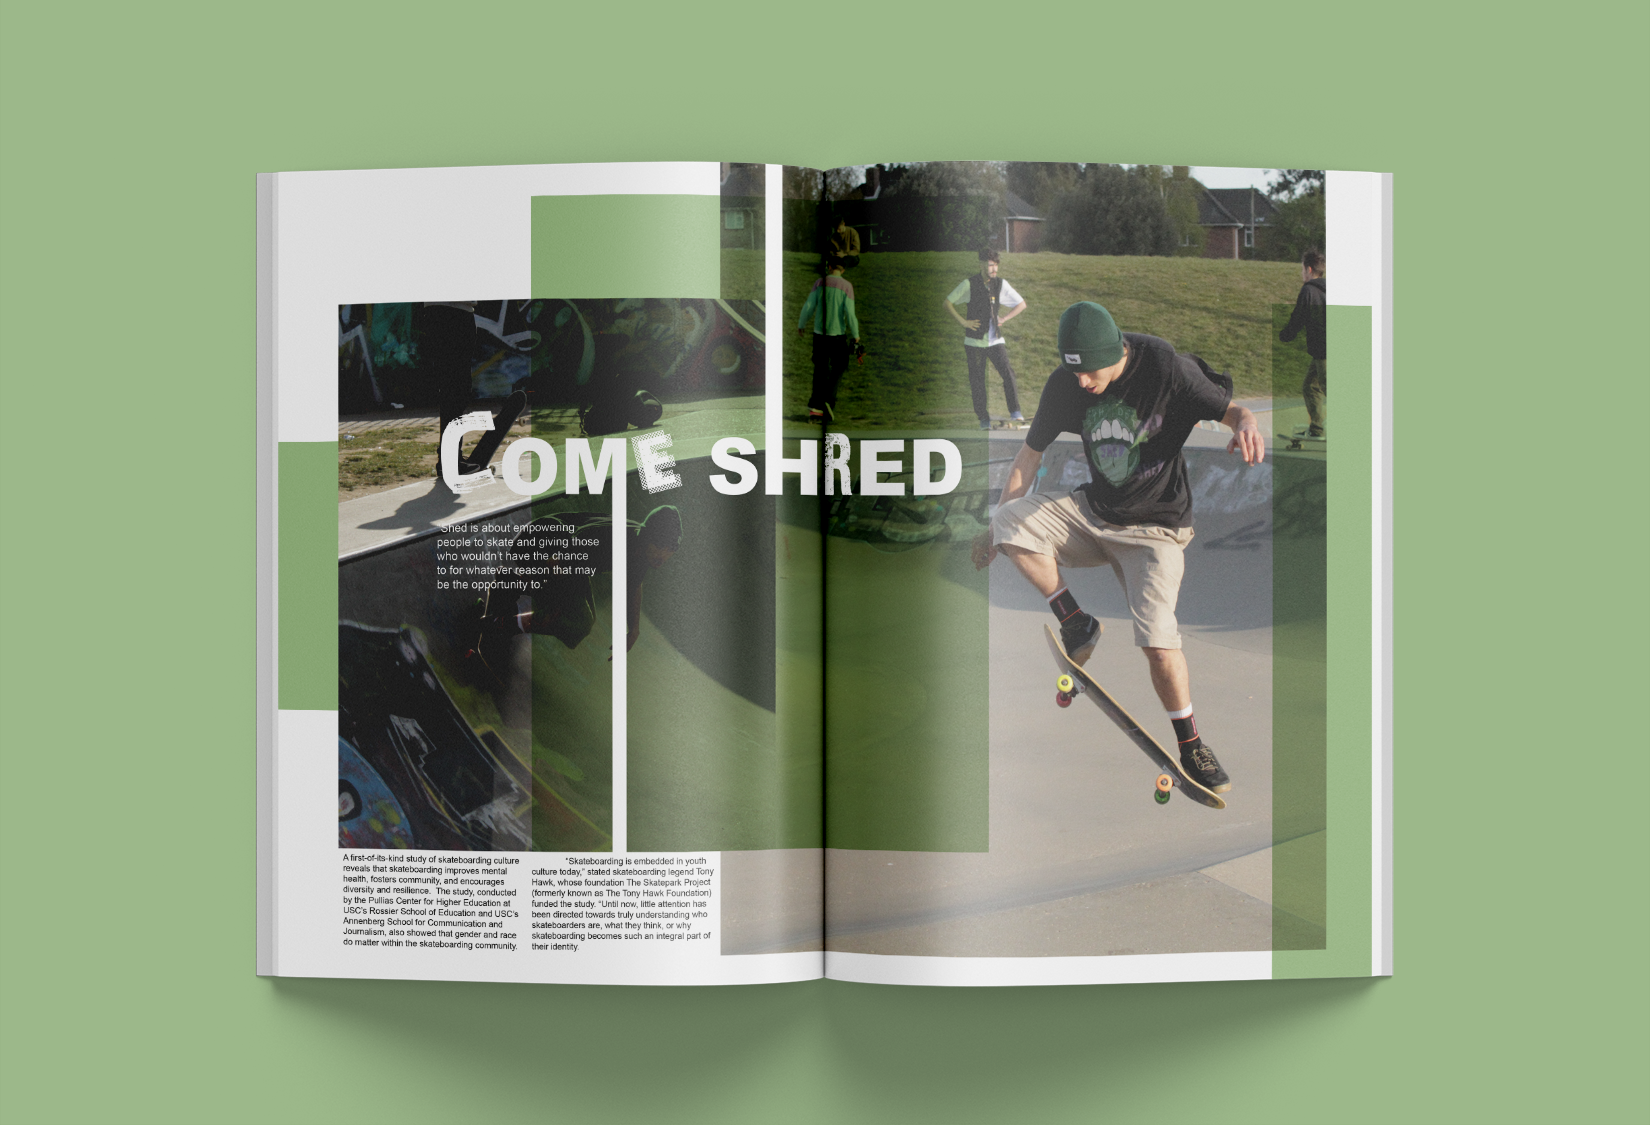 Magazine spread sporting a skateboarder and come shred in large letters